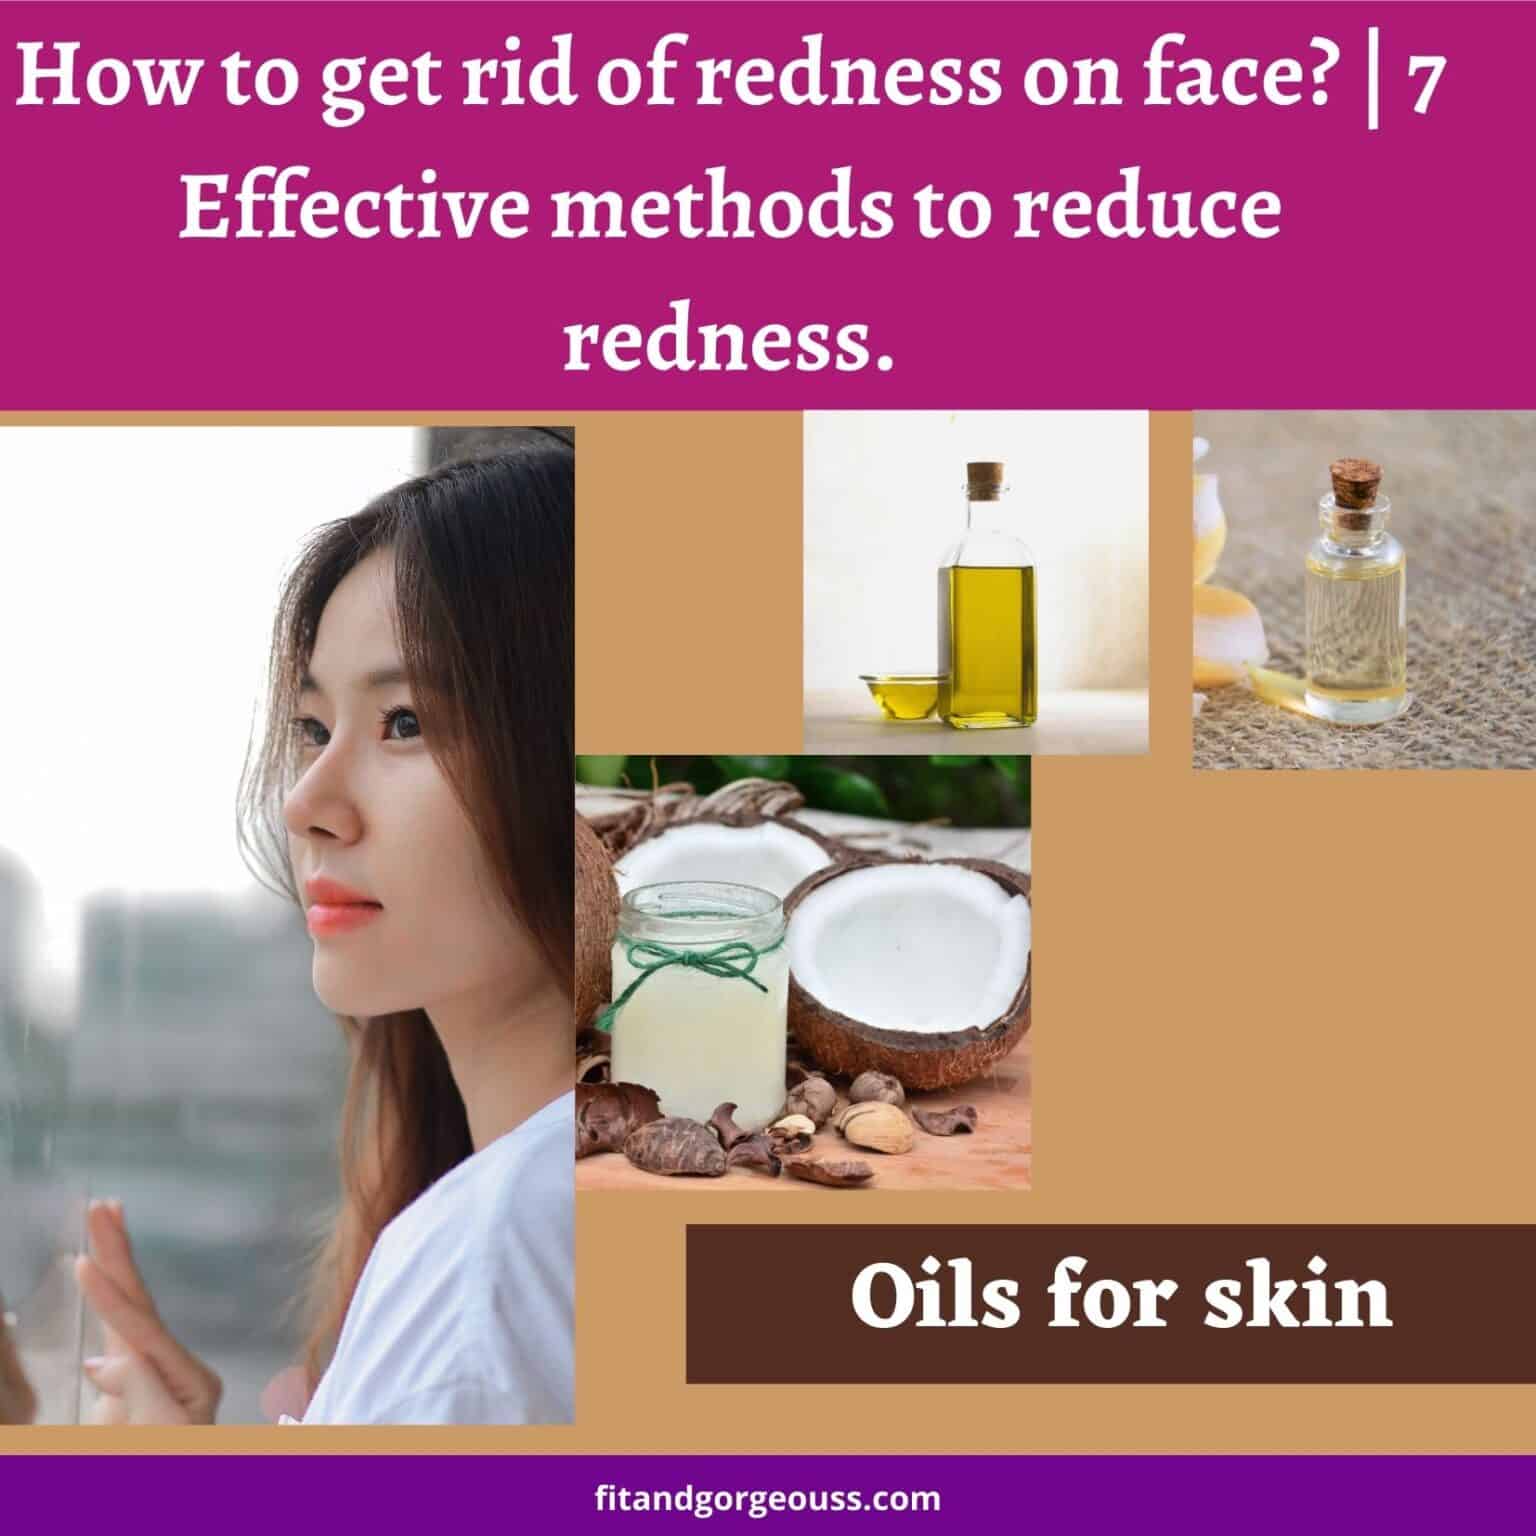 How To Get Rid Of Redness On Face?